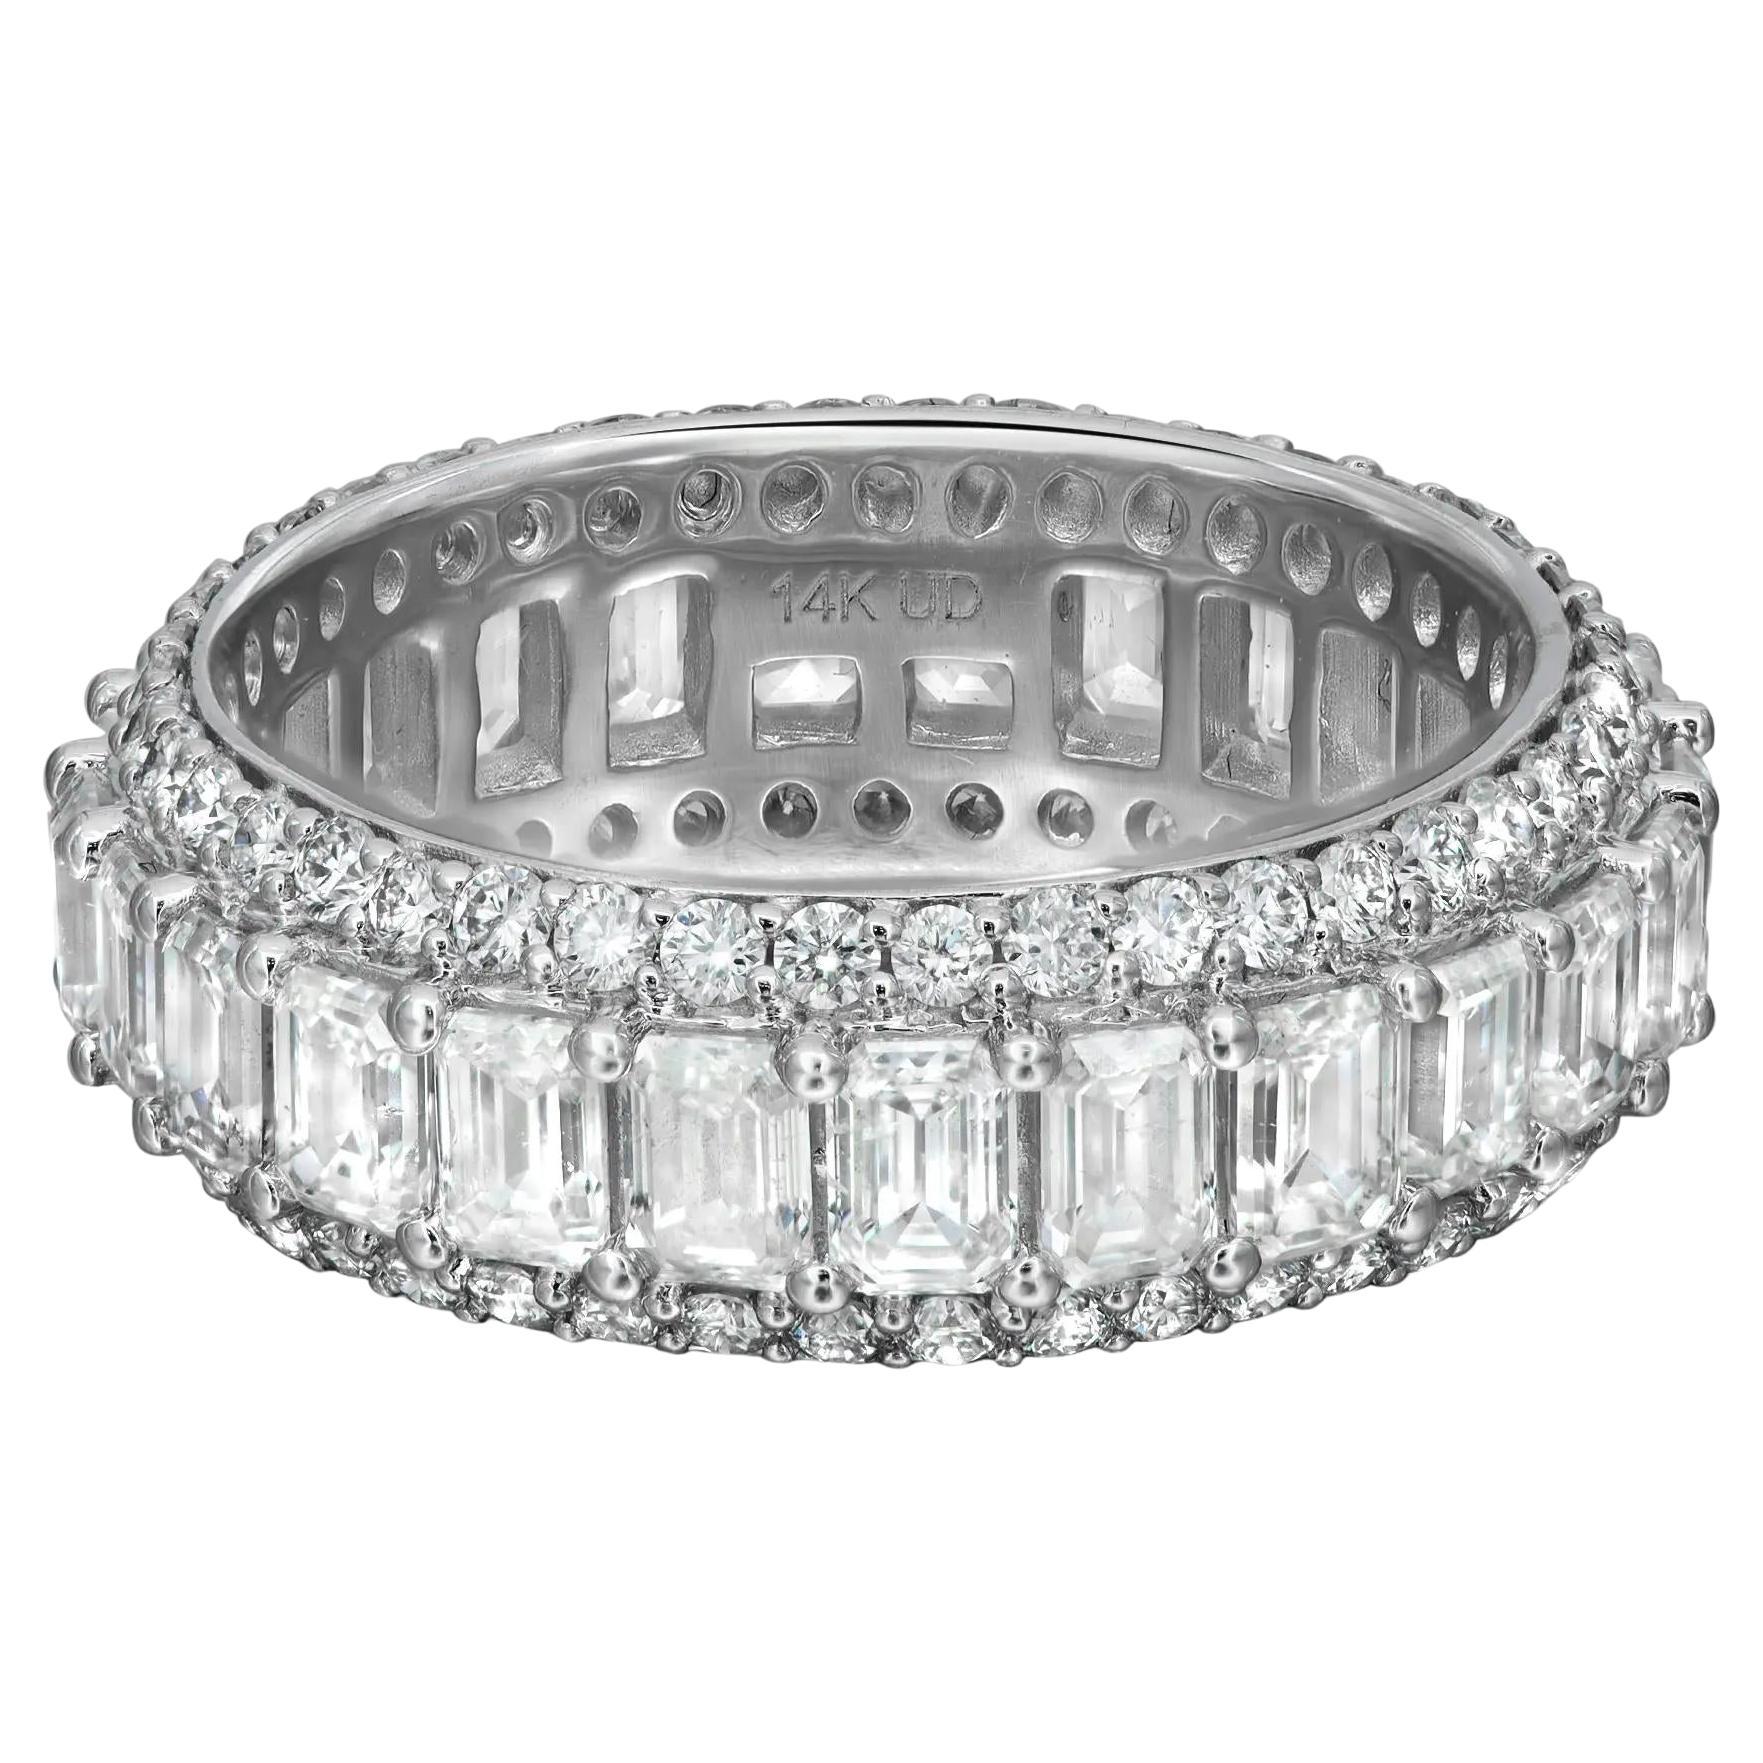 Diamond Ring Baguette & Round Cut In 14K White Gold 4.75Cttw For Sale